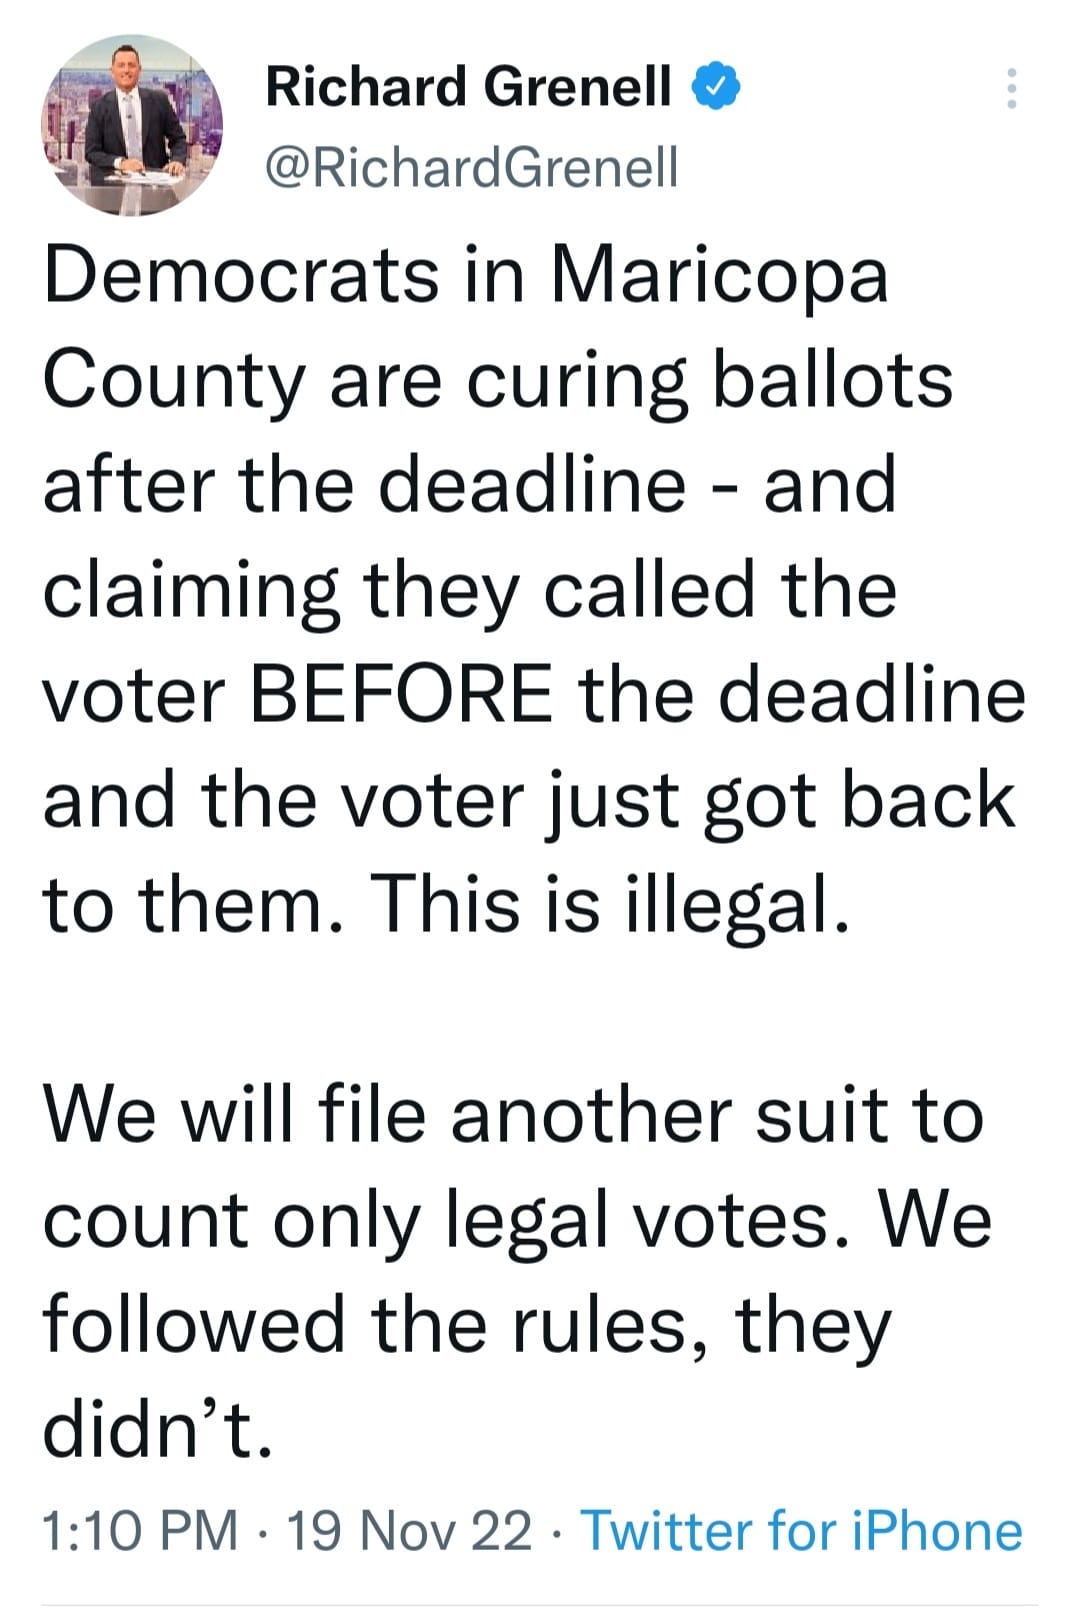 May be an image of 1 person and text that says 'Richard Grenell @RichardGrenell Democrats in Maricopa County are curing ballots after the deadline and claiming they called the voter BEFORE the deadline and the voter just got back to them. This is illegal. We will file another suit to count only legal votes. We followed the rules, they didn't. 1:10 PM 19 Nov 22 Twitter for iPhone'